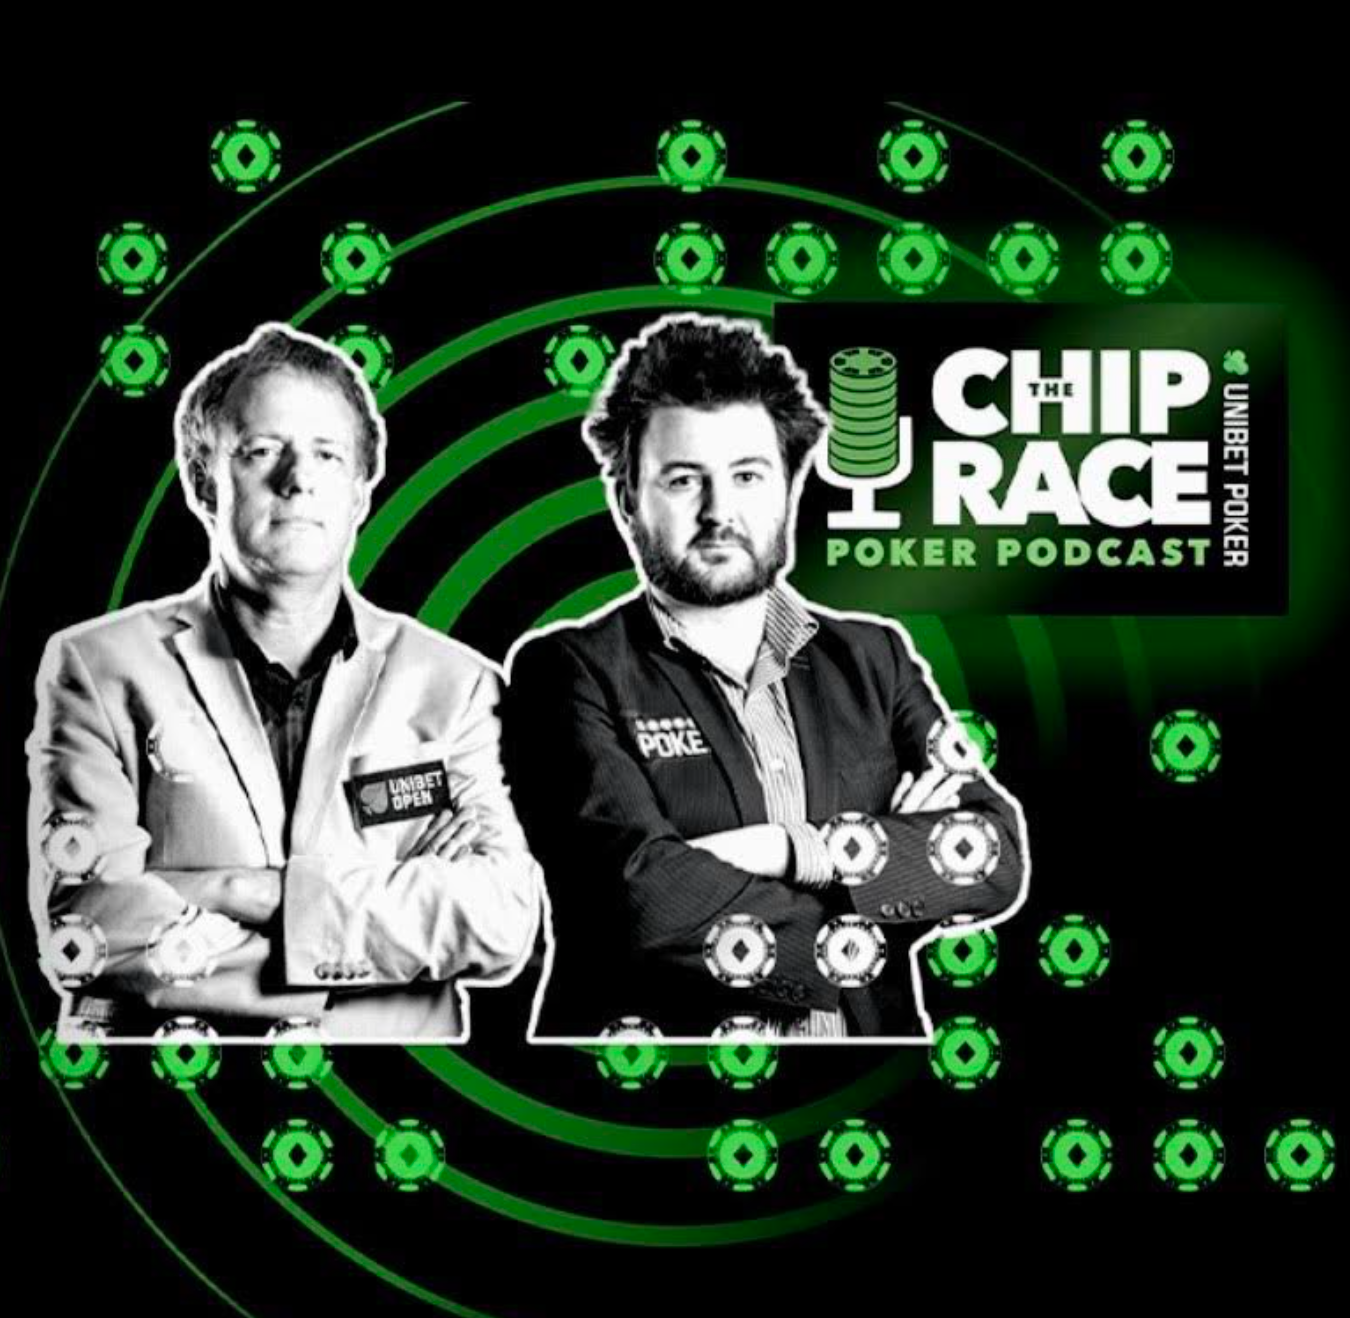 Promo image/logo for Unibet Poker's podcast, The Chip Race, featuring the two hosts against a black background with green poker chips floating behind them. The podcast was just nominated for its second GPI Best Poker Podcast Award.